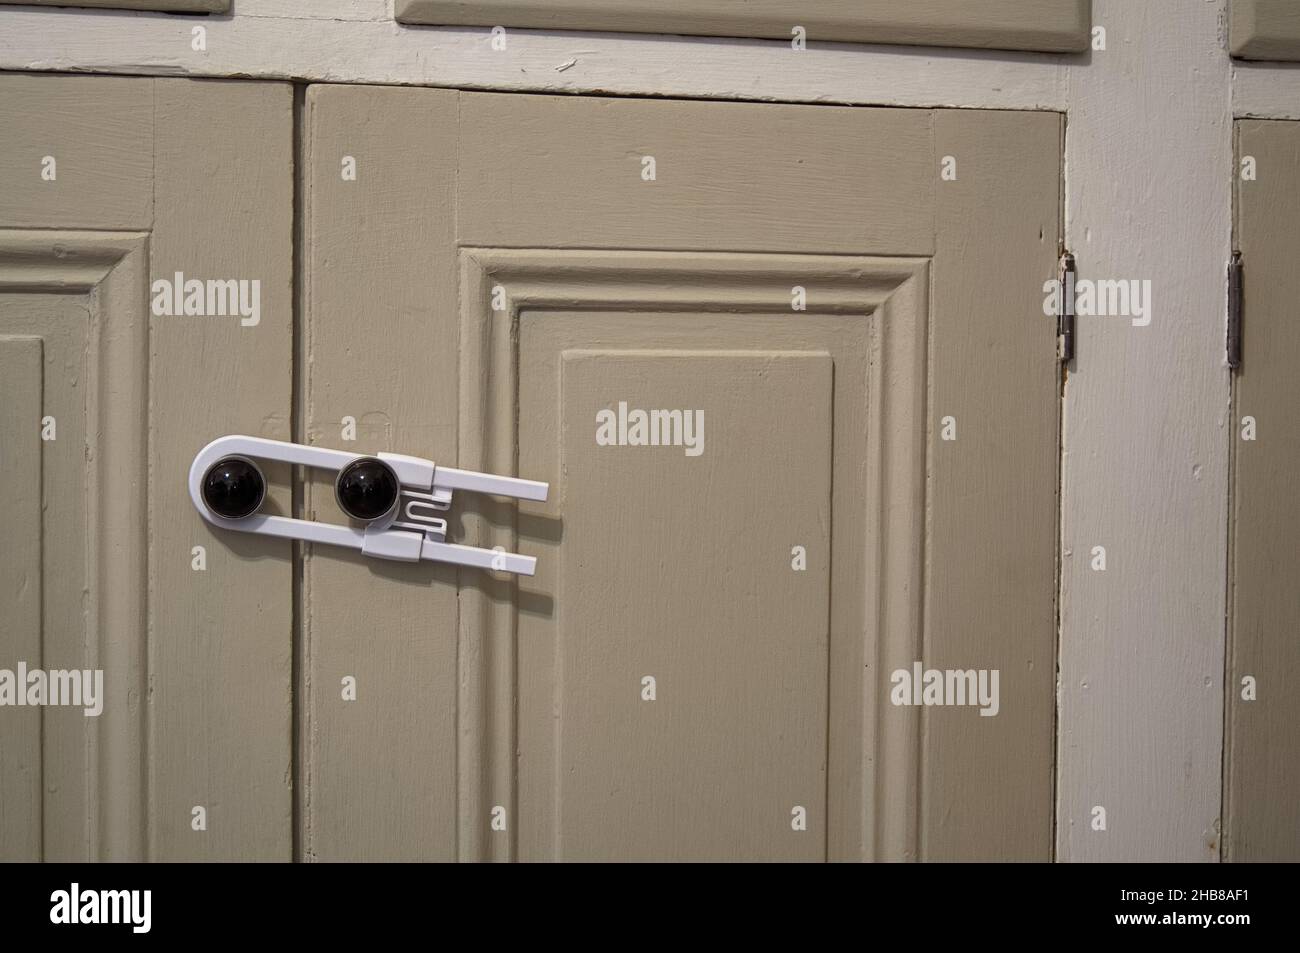 A white child safety lock preventing a child from opening the doors of a cabinet, with copy space to the right Stock Photo